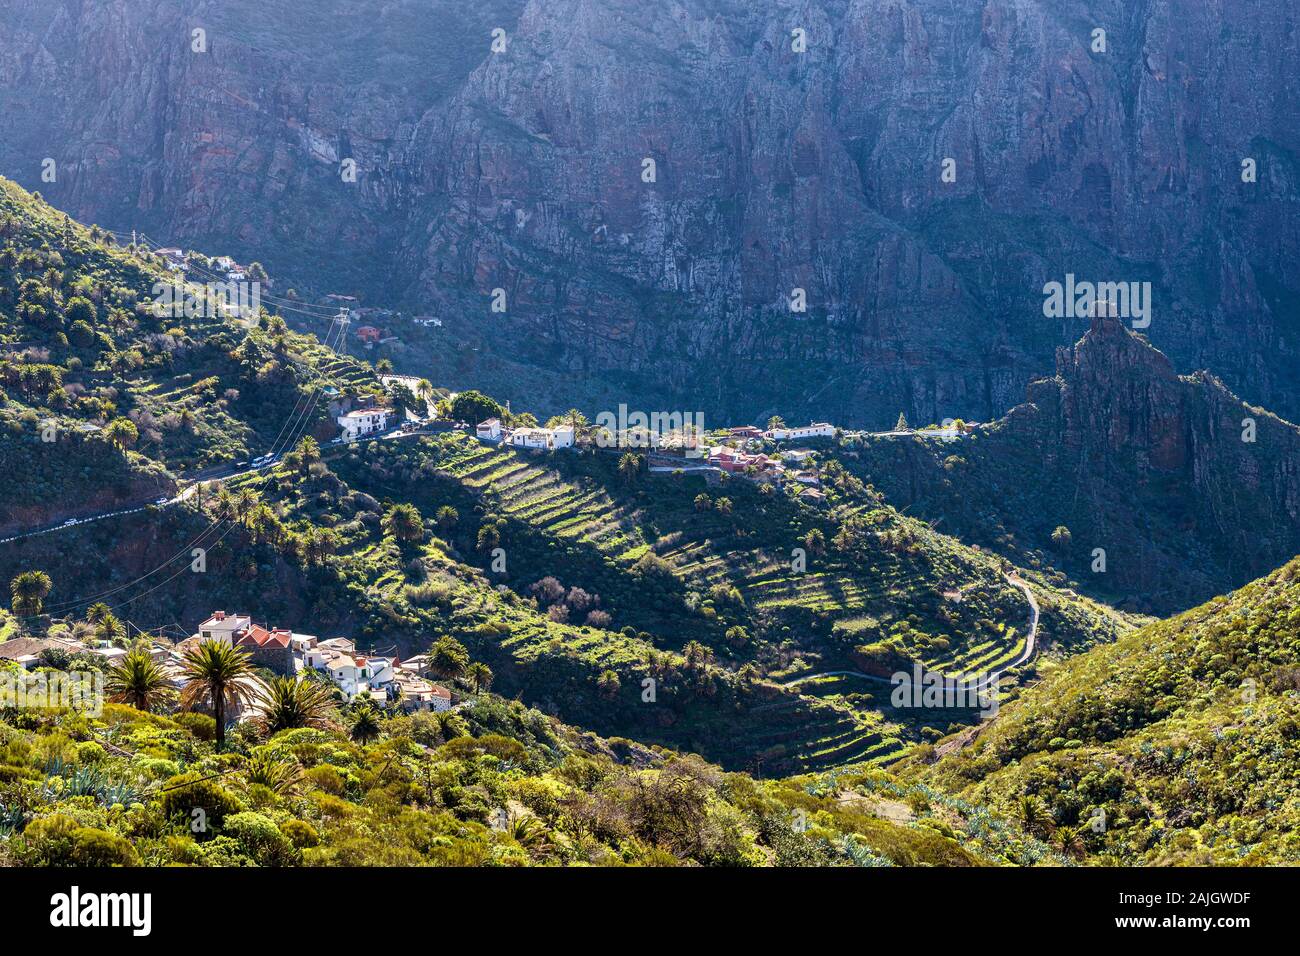 Overlooking Masca village and barranco, gorge, from the Mirador de Hilda, viewpoint, Tenerife, Canary Islands, Spain Stock Photo